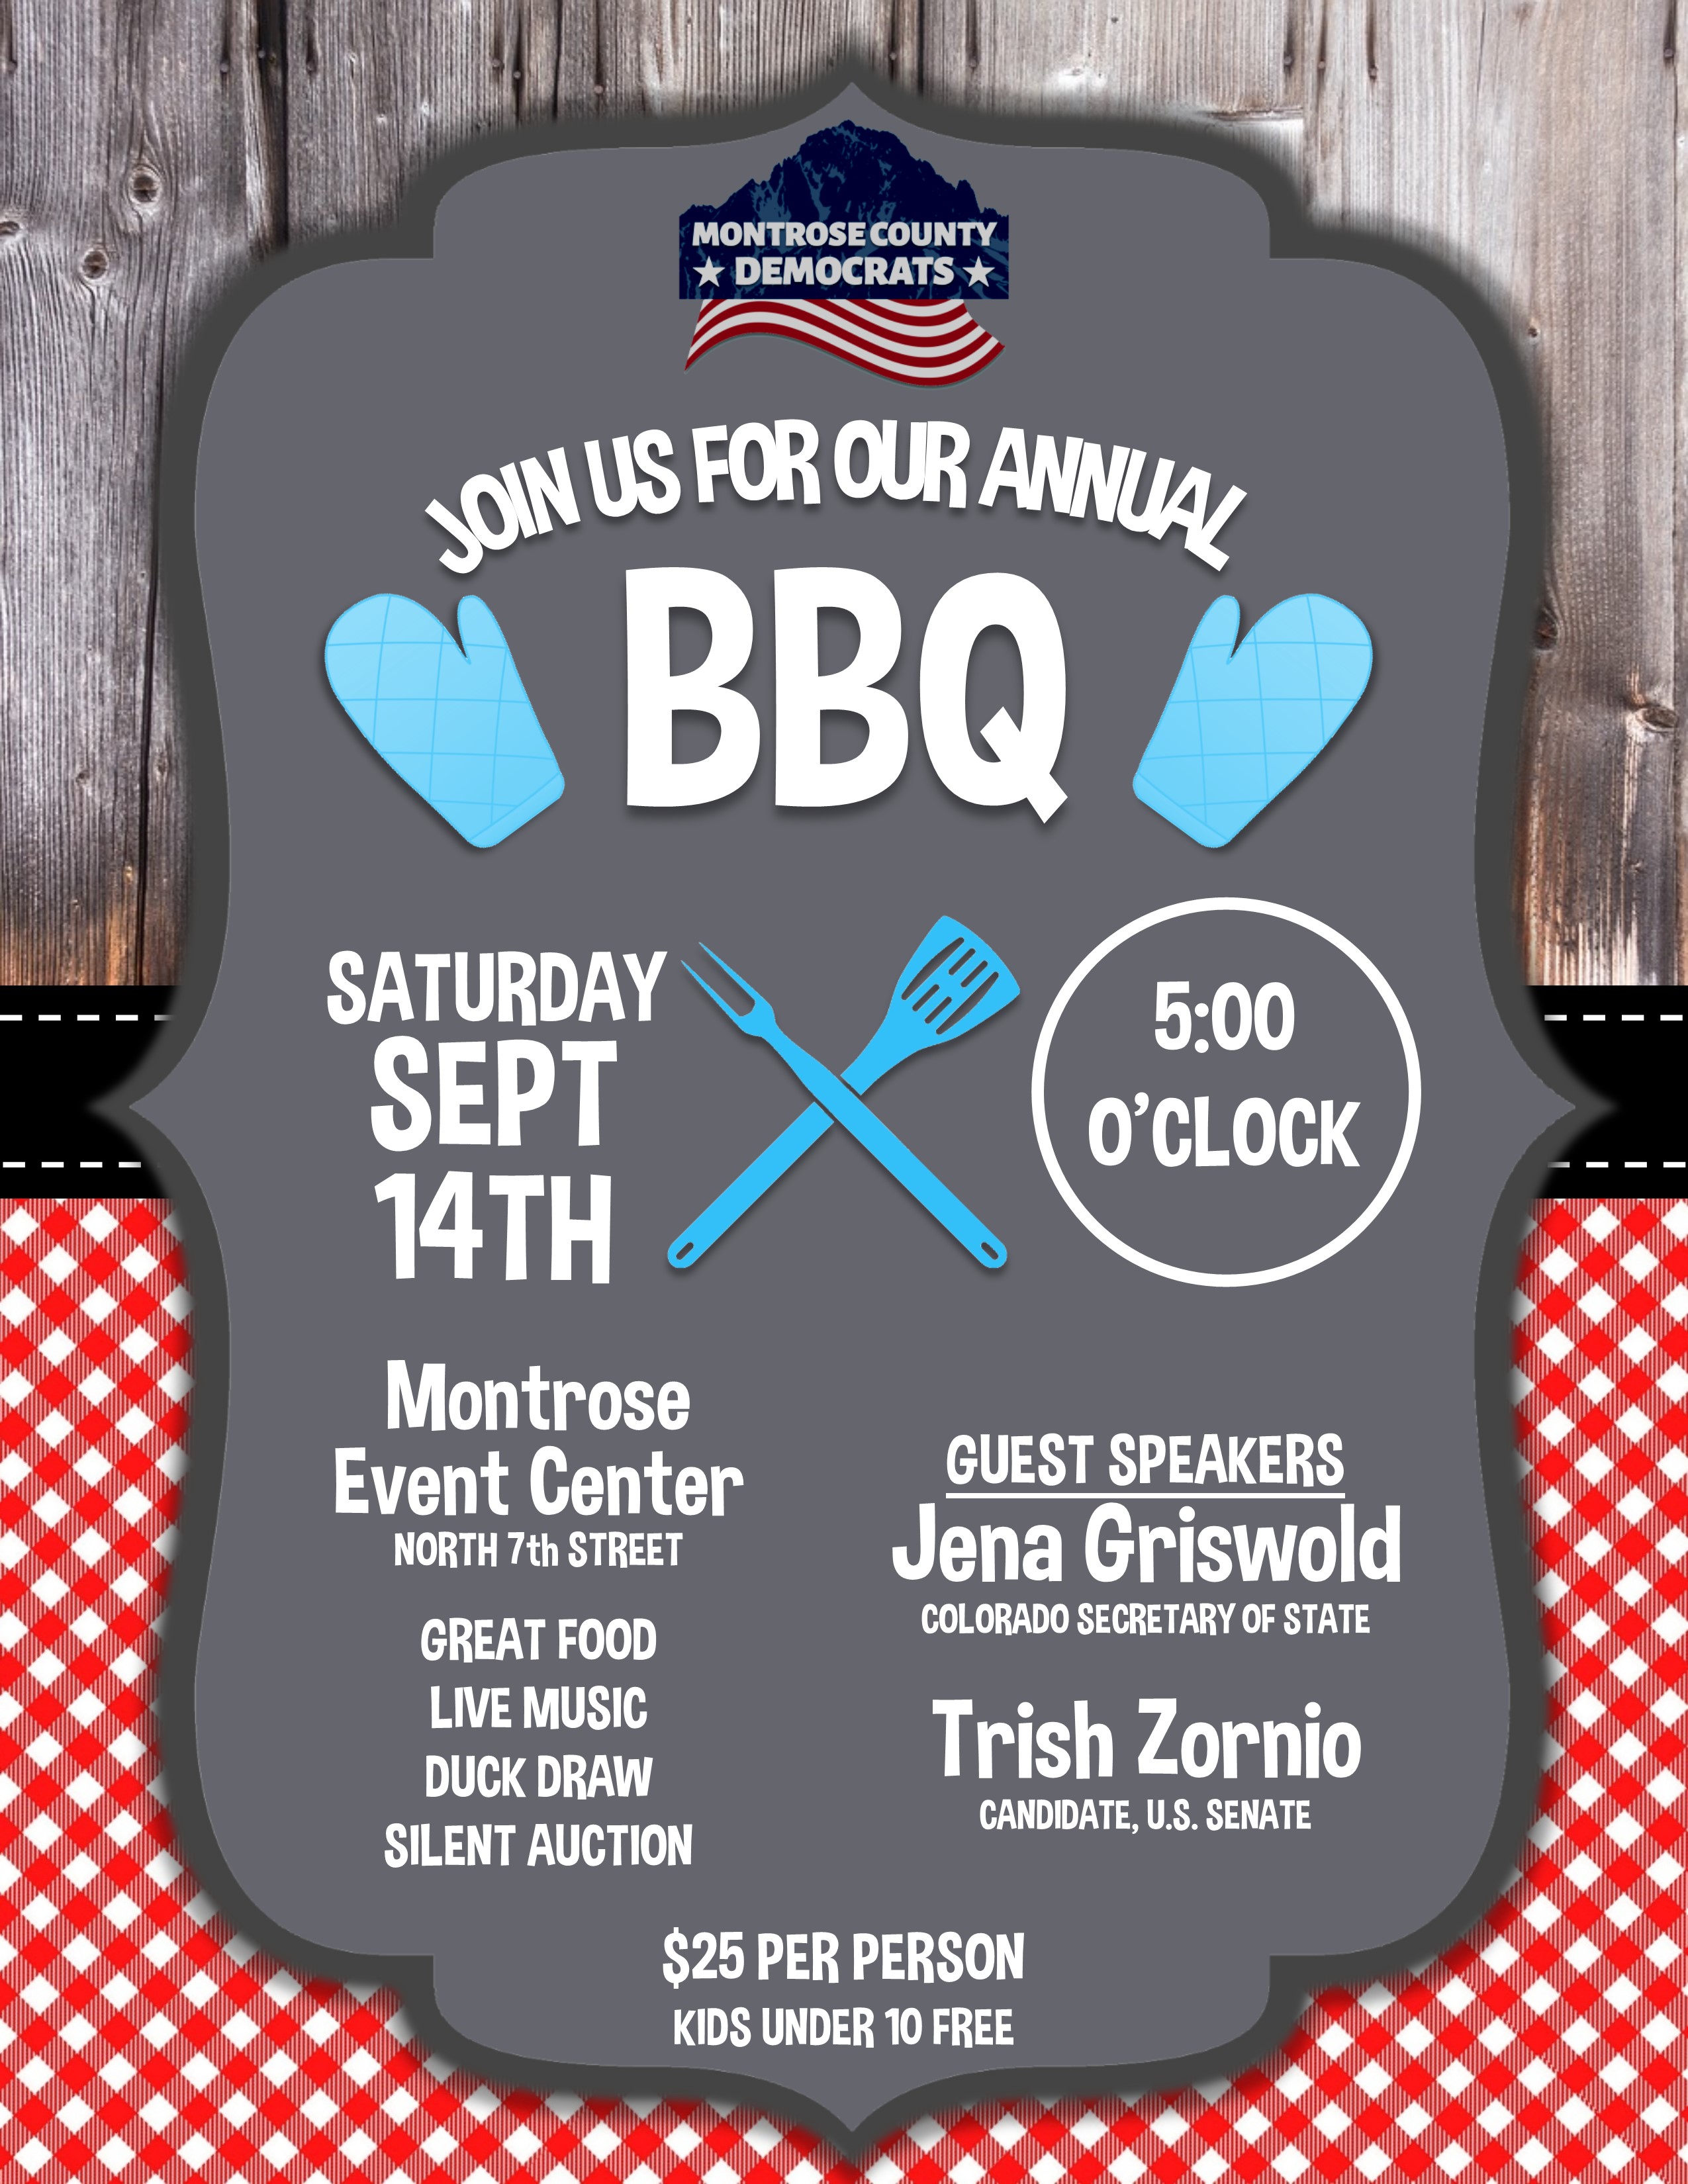 Click to get your tickets now to our annual BBQ on Saturday, September 14, 2019 at Montrose Events Center